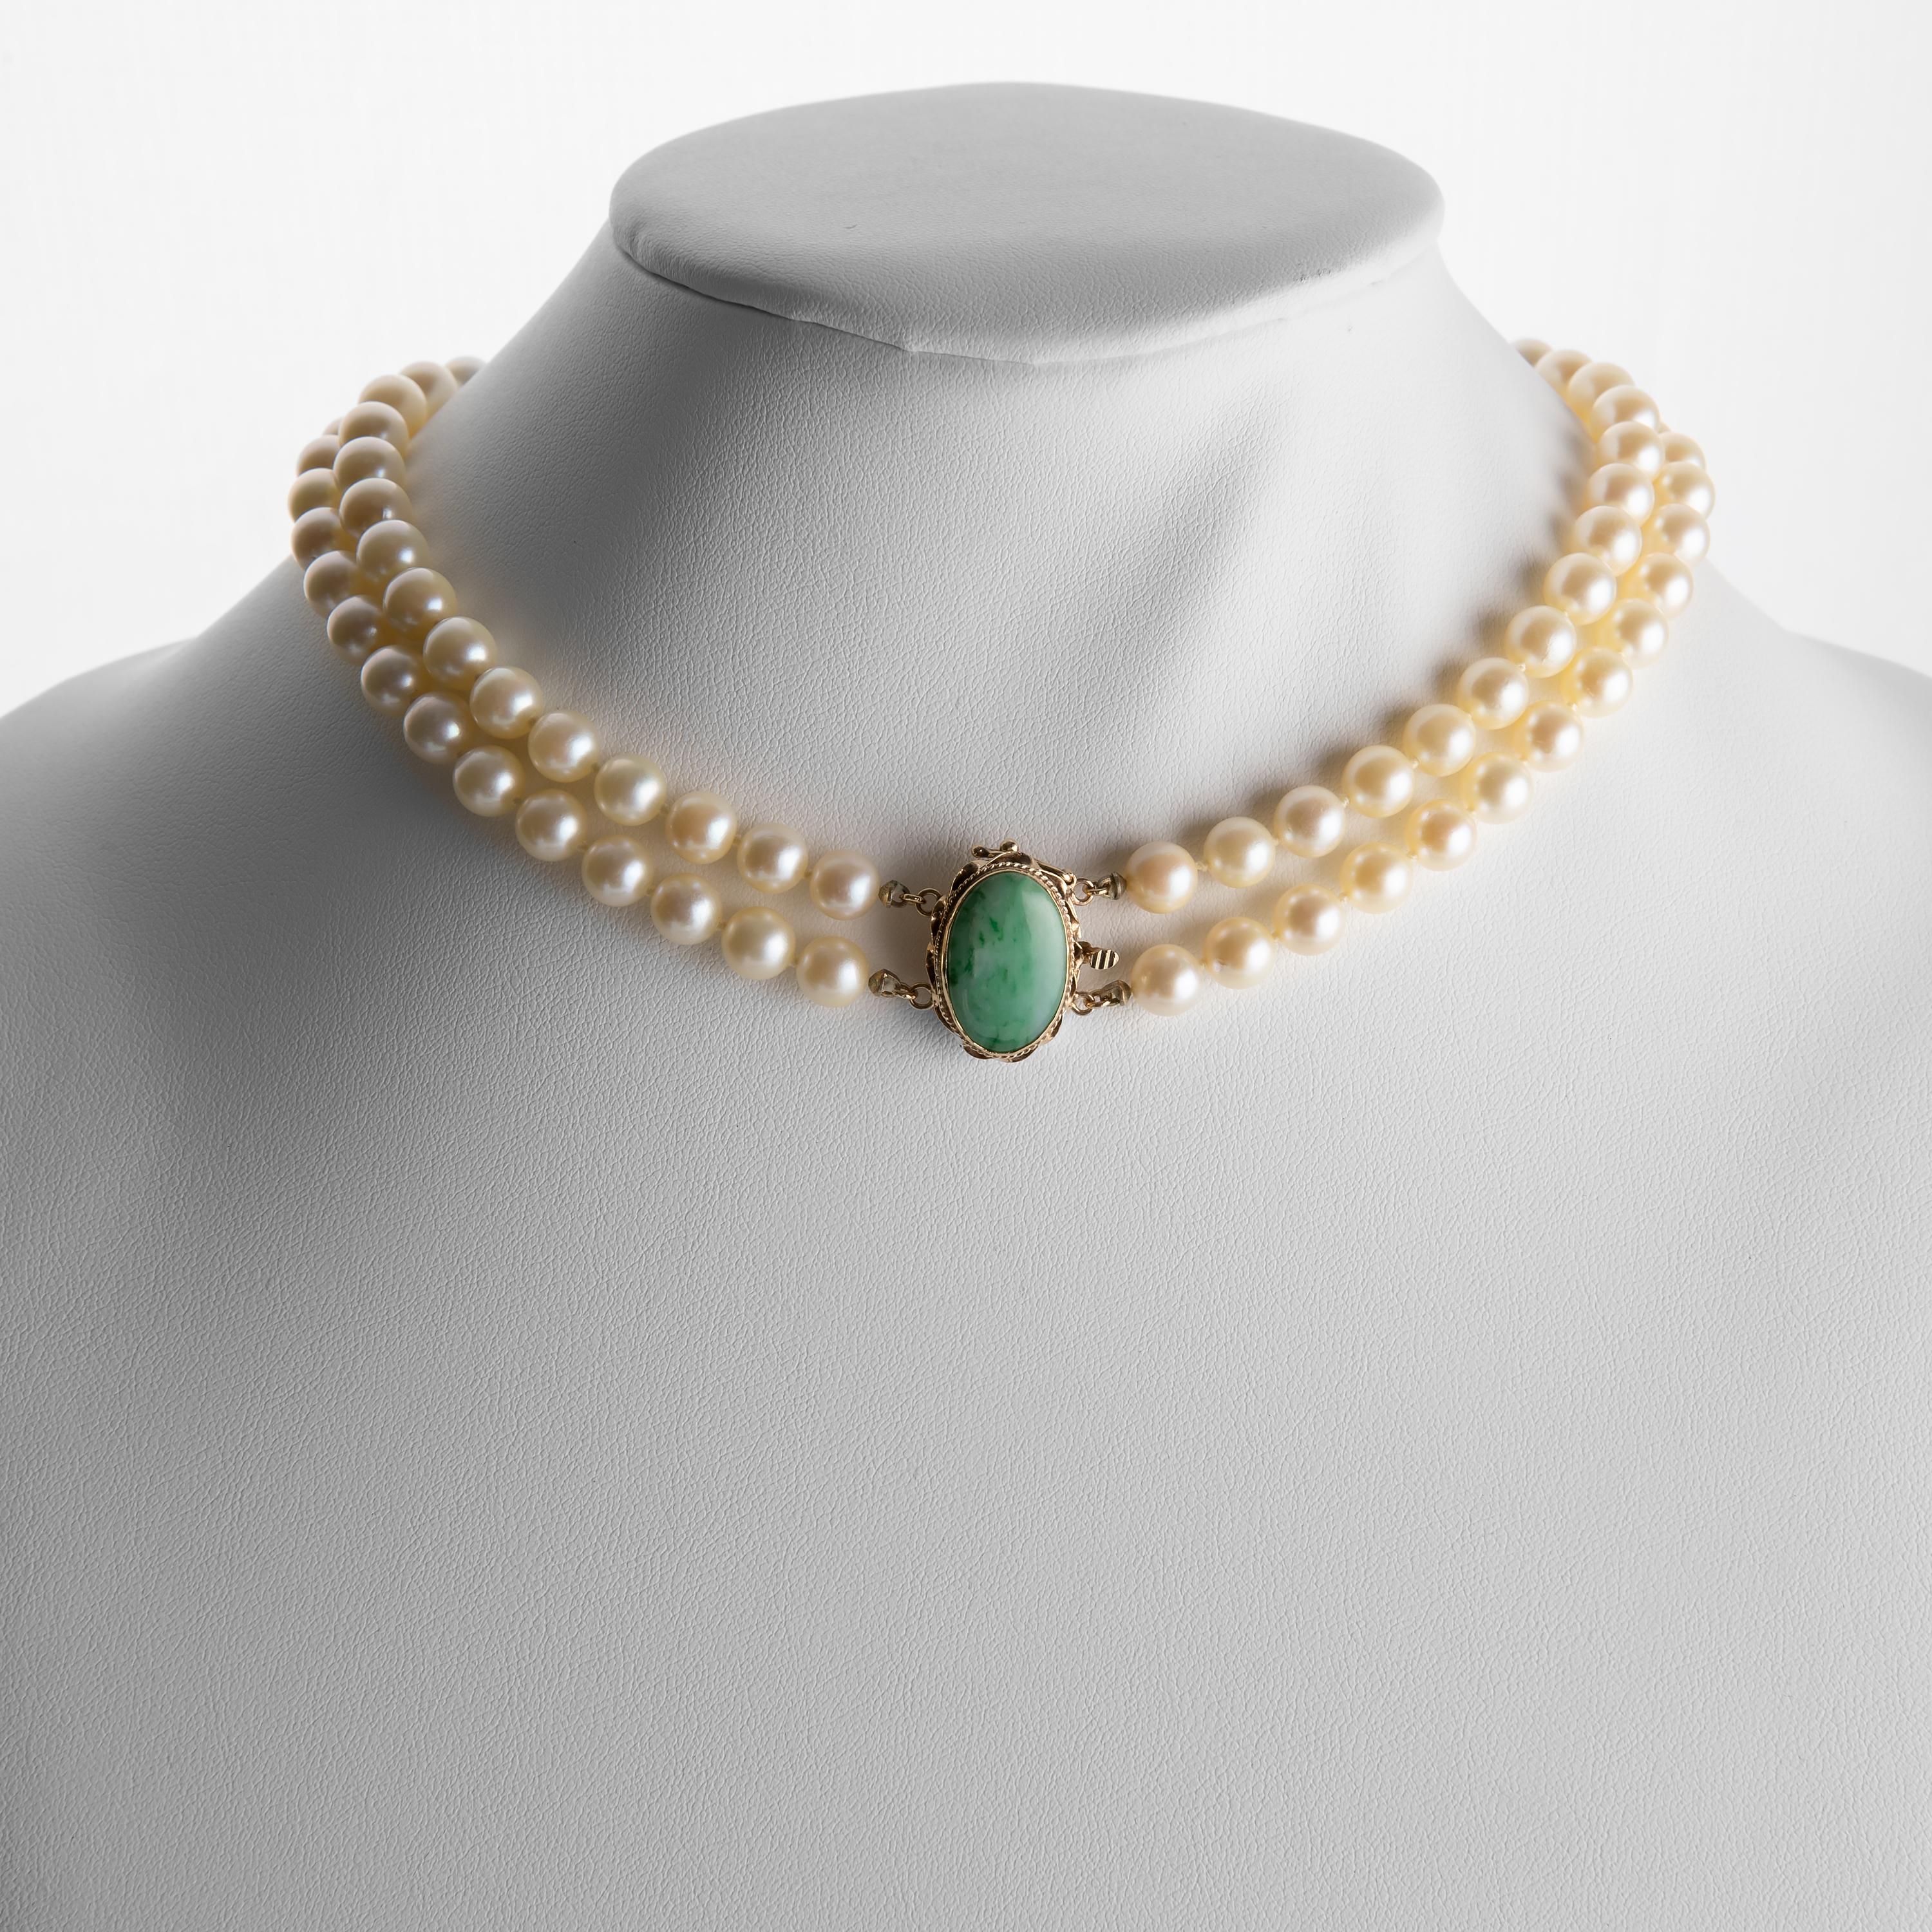 This double strand of cultured Akoya pearls of impressive size —7mm - 8.13mm— is a timeless classic. Created in America in the 1950s or thereabouts, this necklace features a handmade 14K gold clasp that has been set with a certified untreated